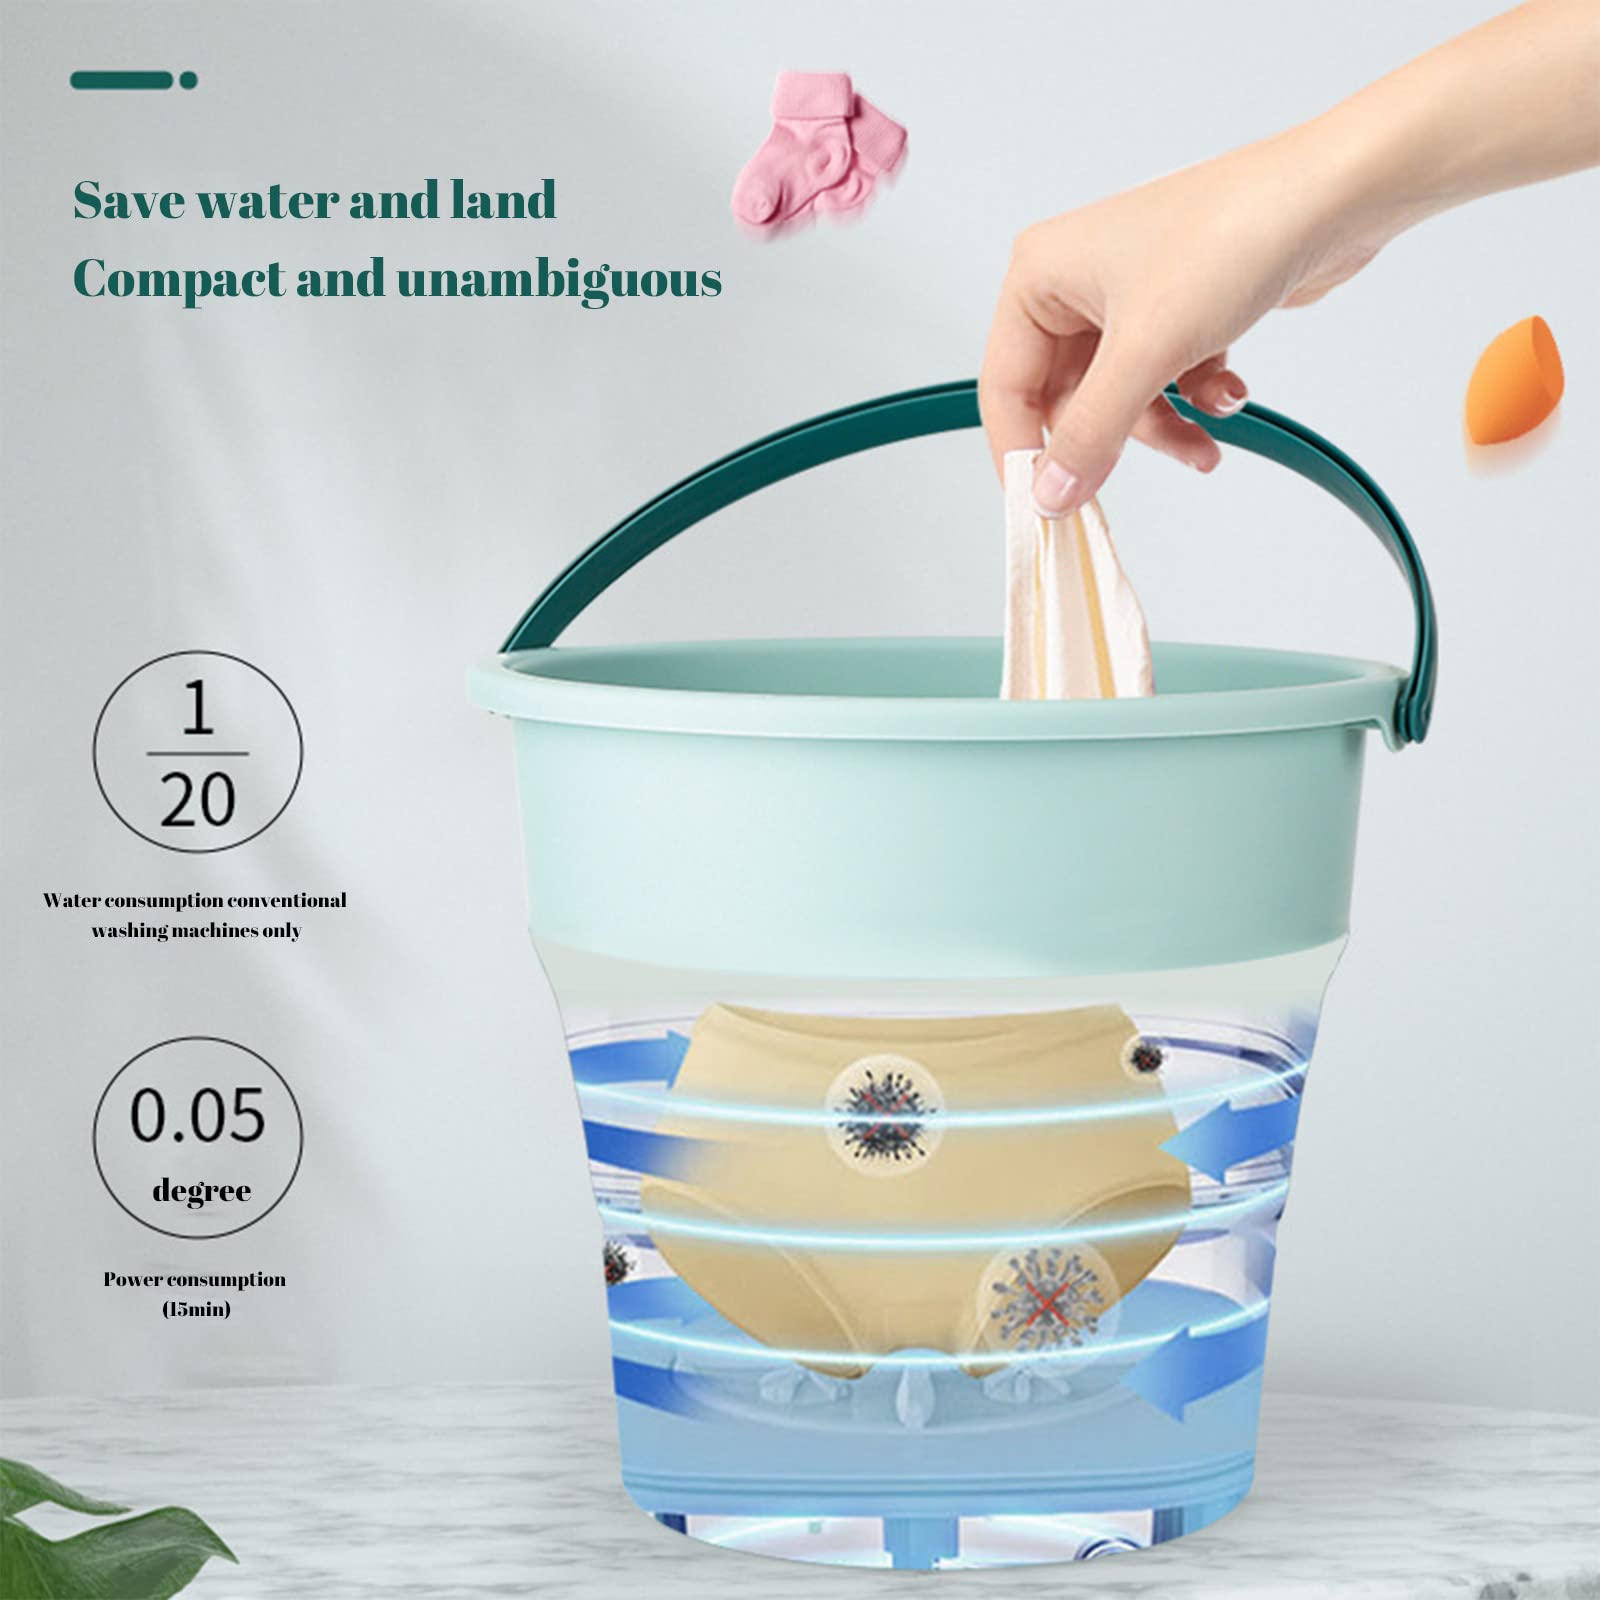 Foldable Mini Washing Machine, Portable Washing Machine for Apartment, Mini Laundry Small Handheld Turbine Washer for Underwear Socks Baby Clothes Automatic Clothes Washer Tub for Camping RV Travel